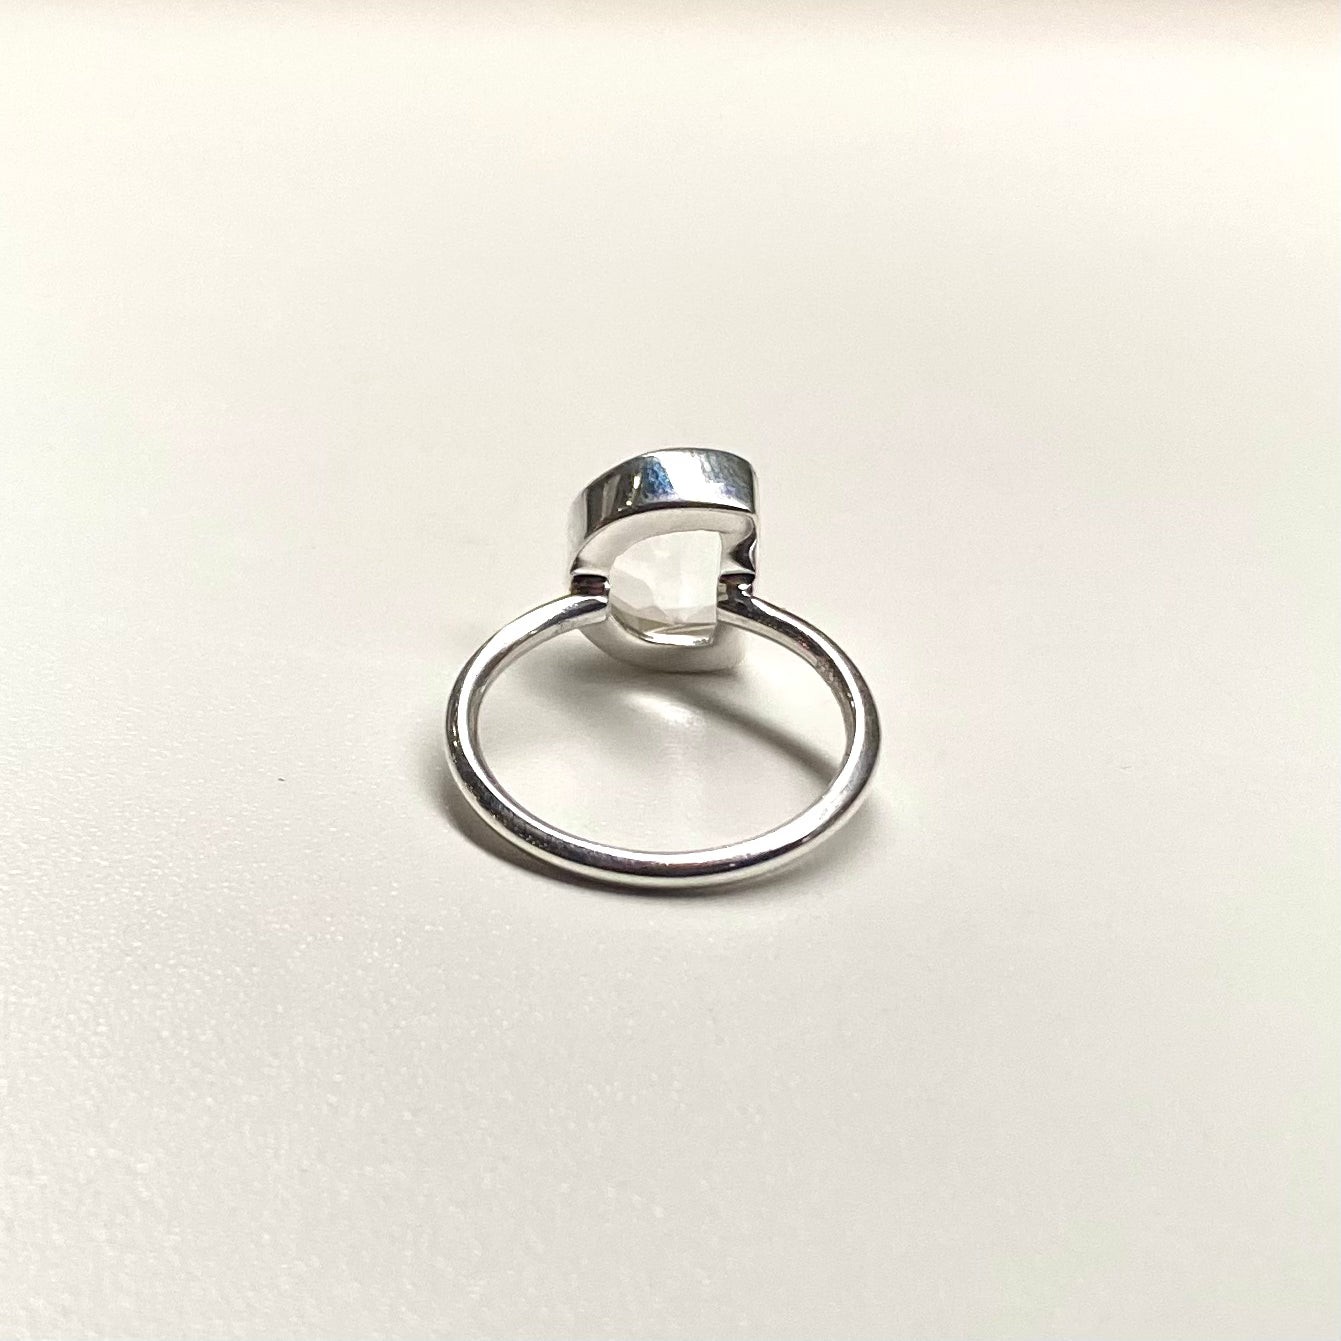 Silver925 1stone ring 11